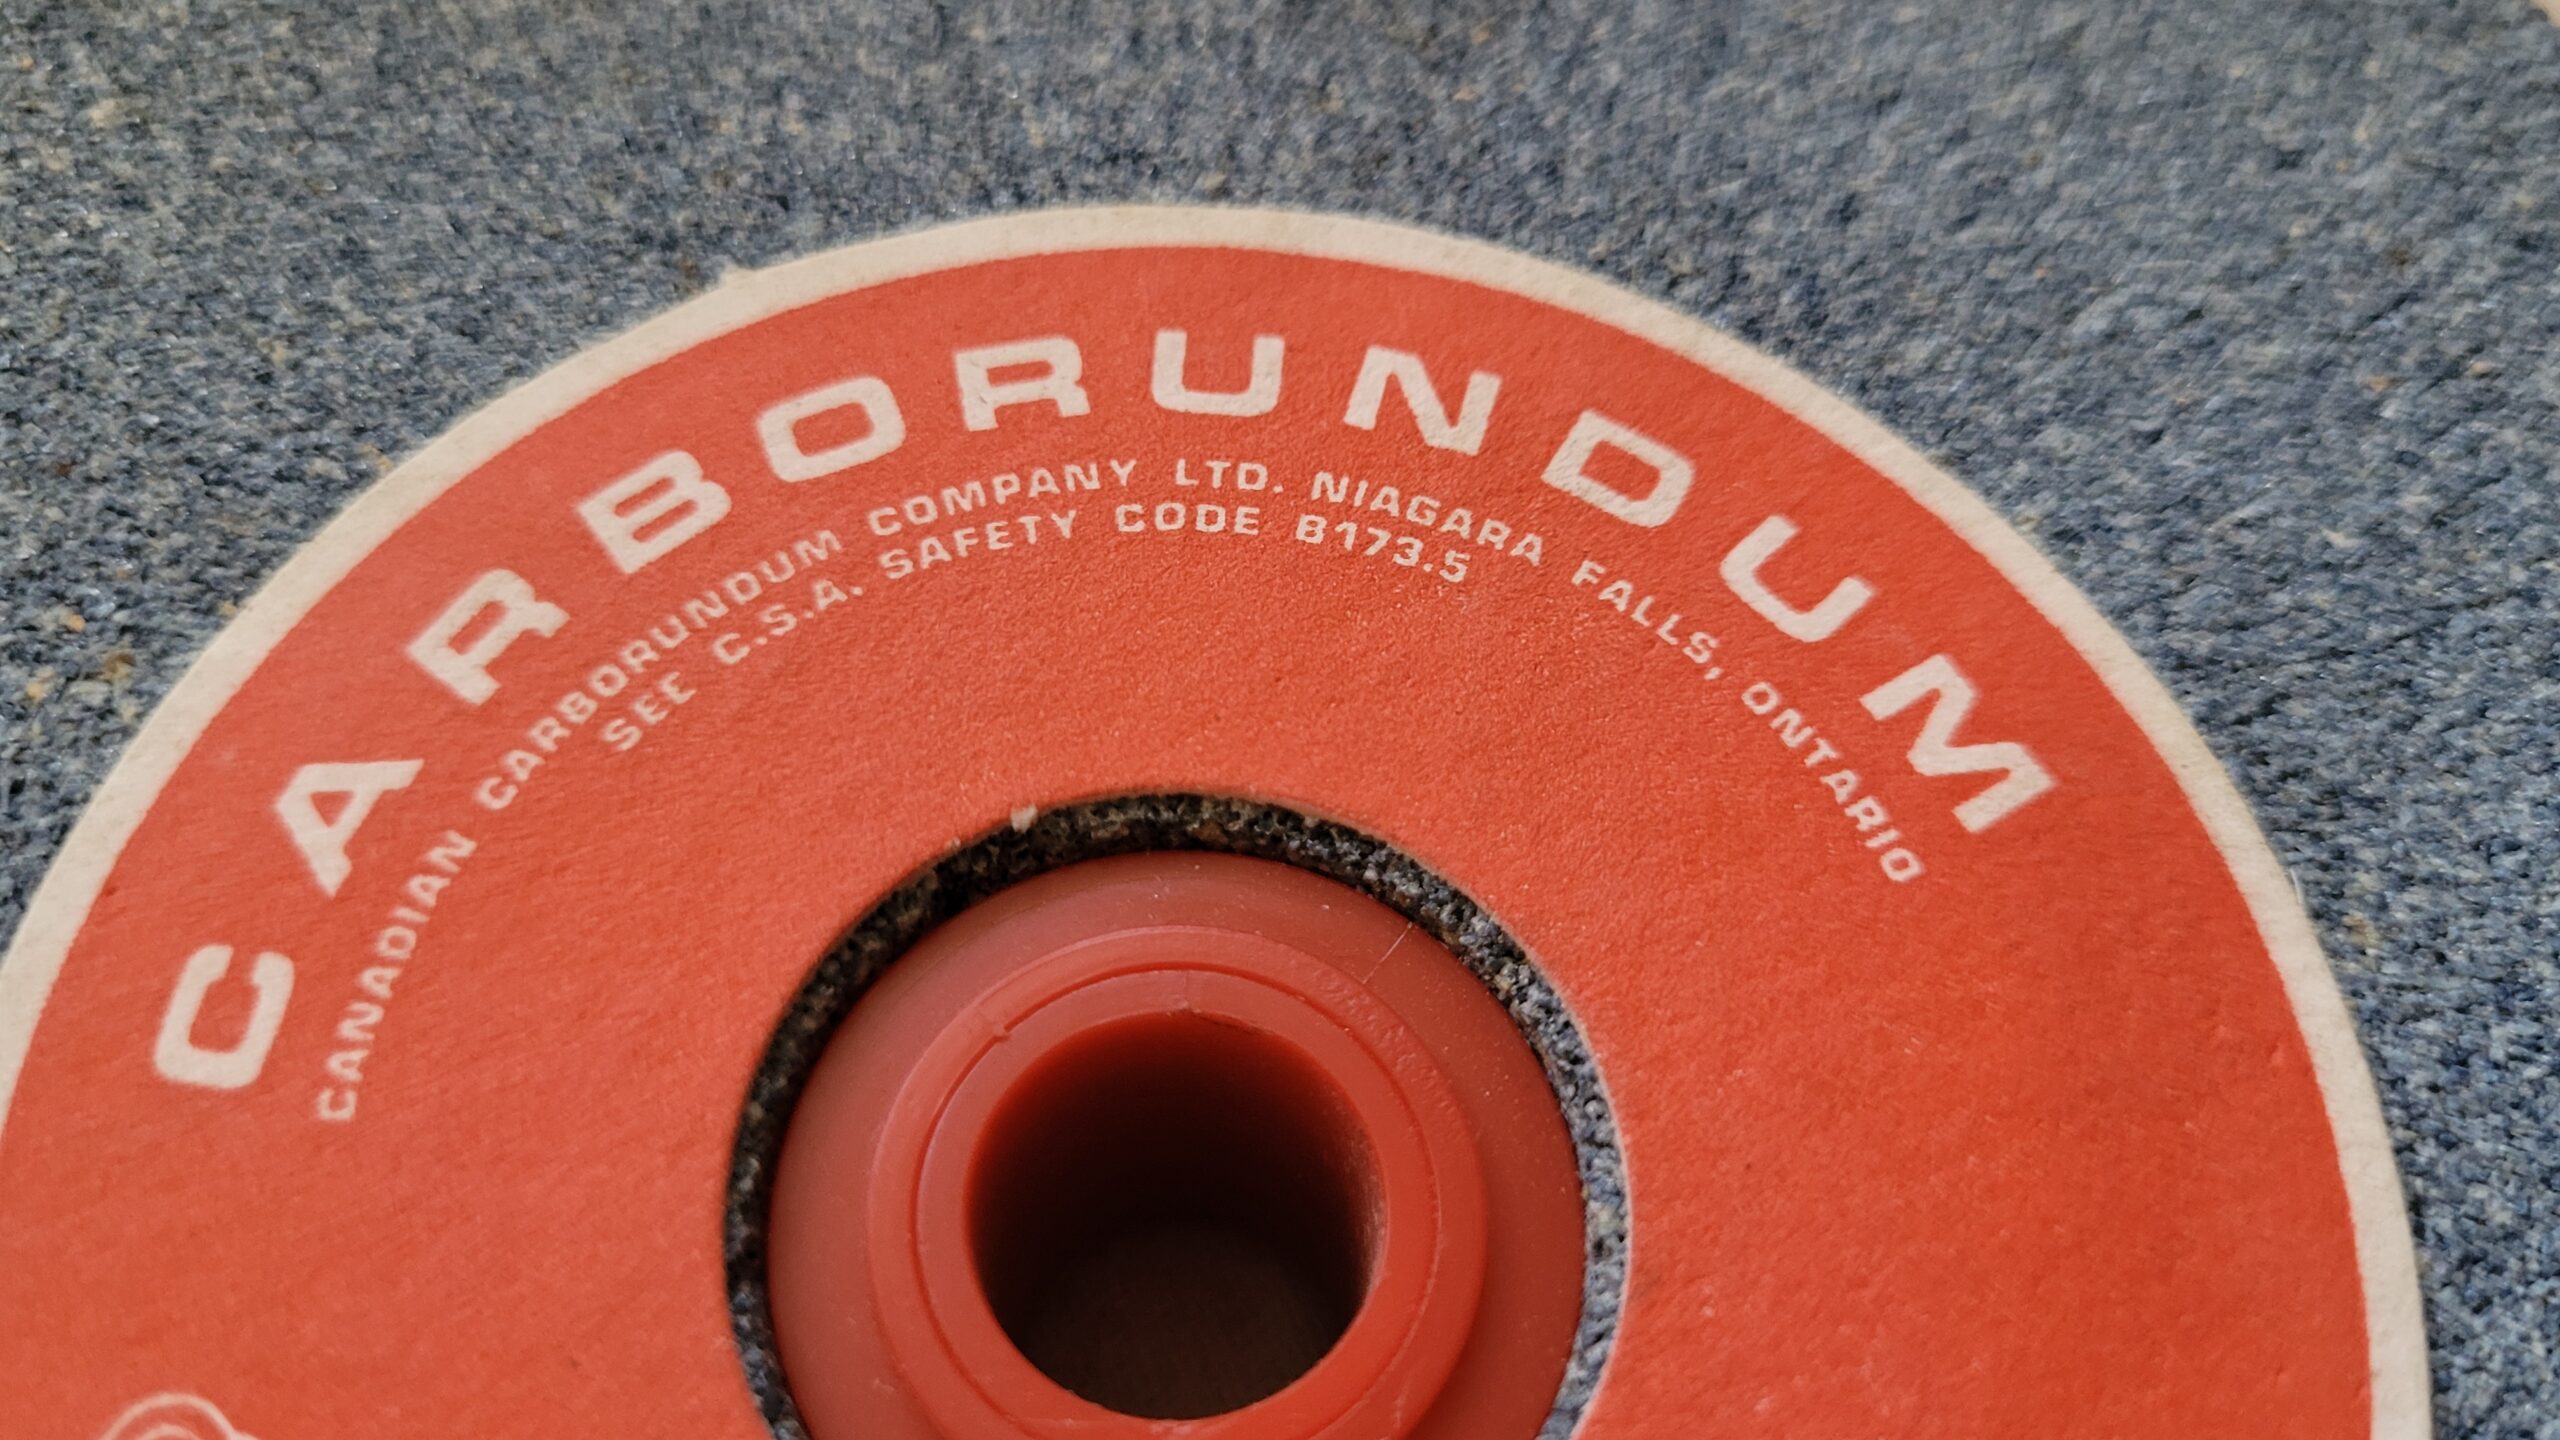 vintage-canadian-carborundum-company-ltd-grinding-wheel-six-inches-abrasive-stone-vintage-niagara-falls-ontario-vintage-made-in-canada-grinding-wheels-and-sharpening-stones